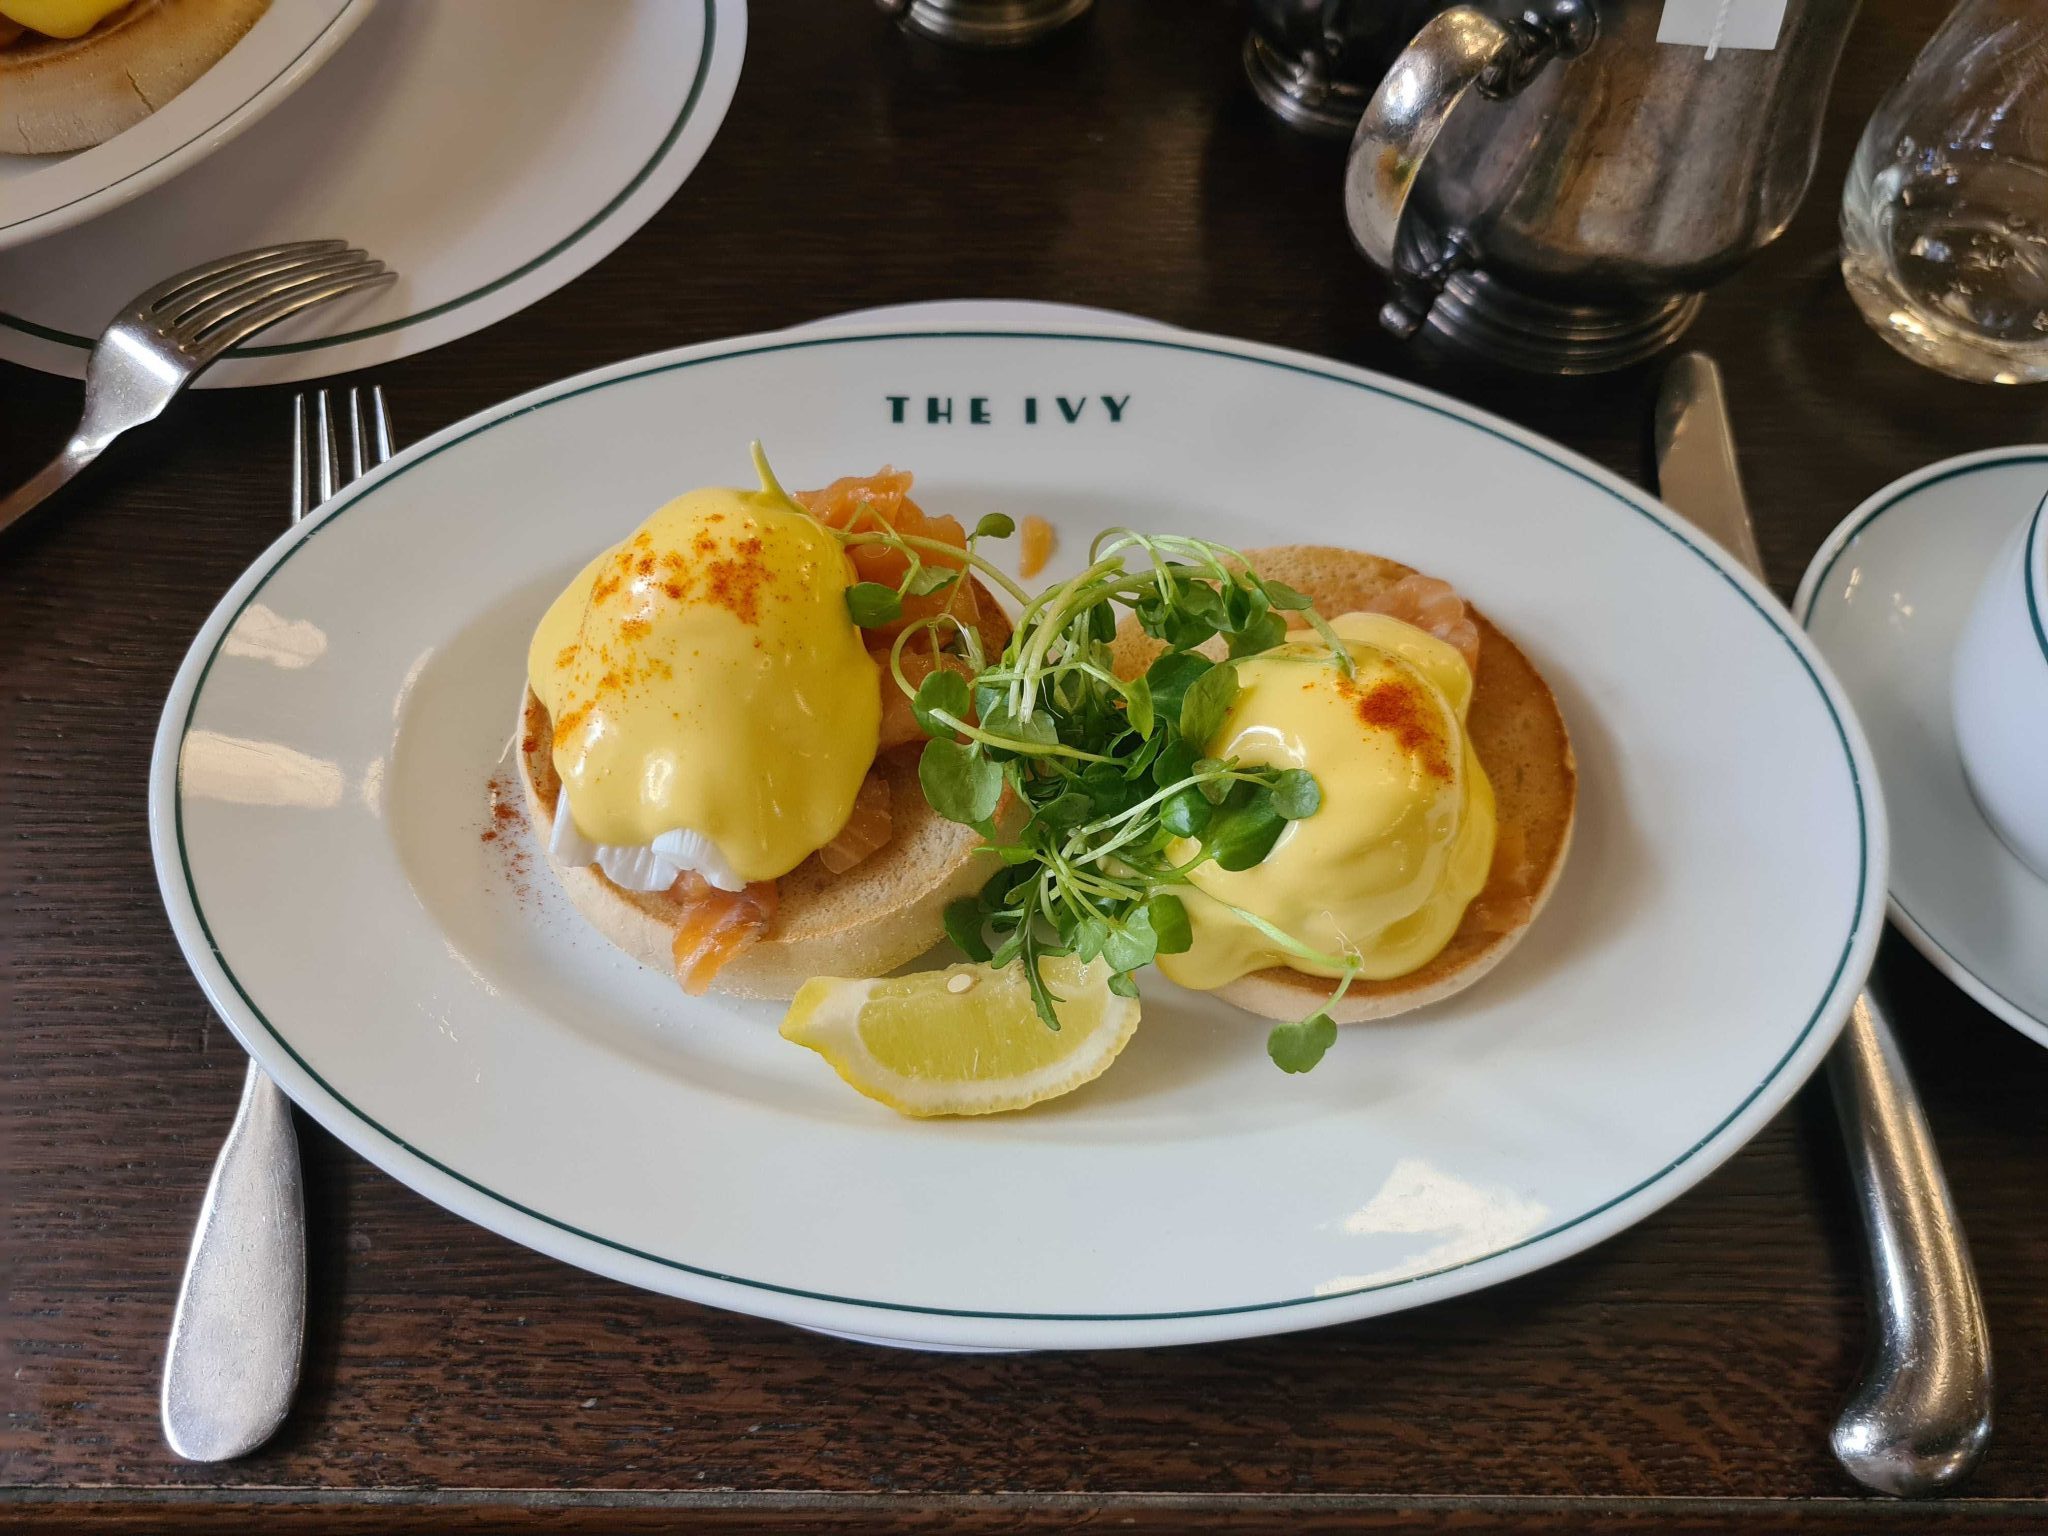 Salmon and eggs on muffin at the Ivy